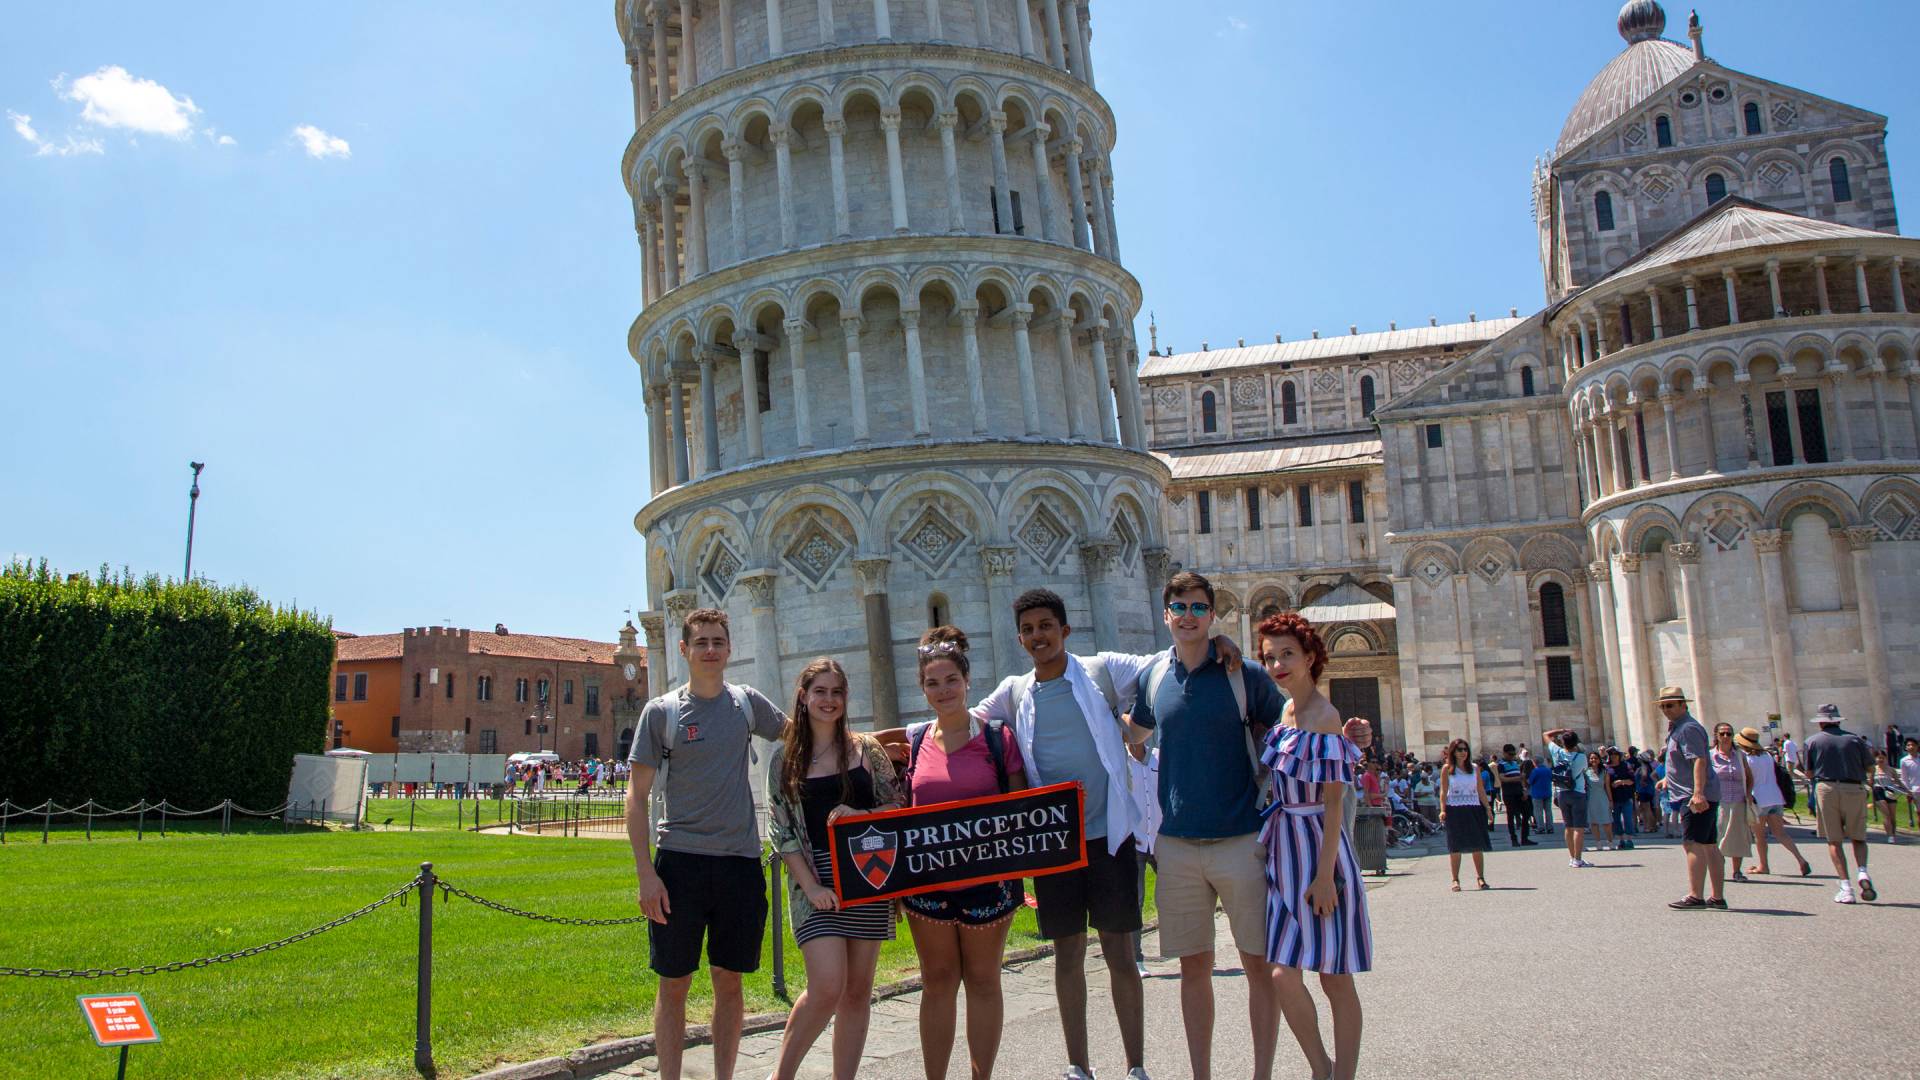 Students standing holding Princeton banner in front of tower of Pisa